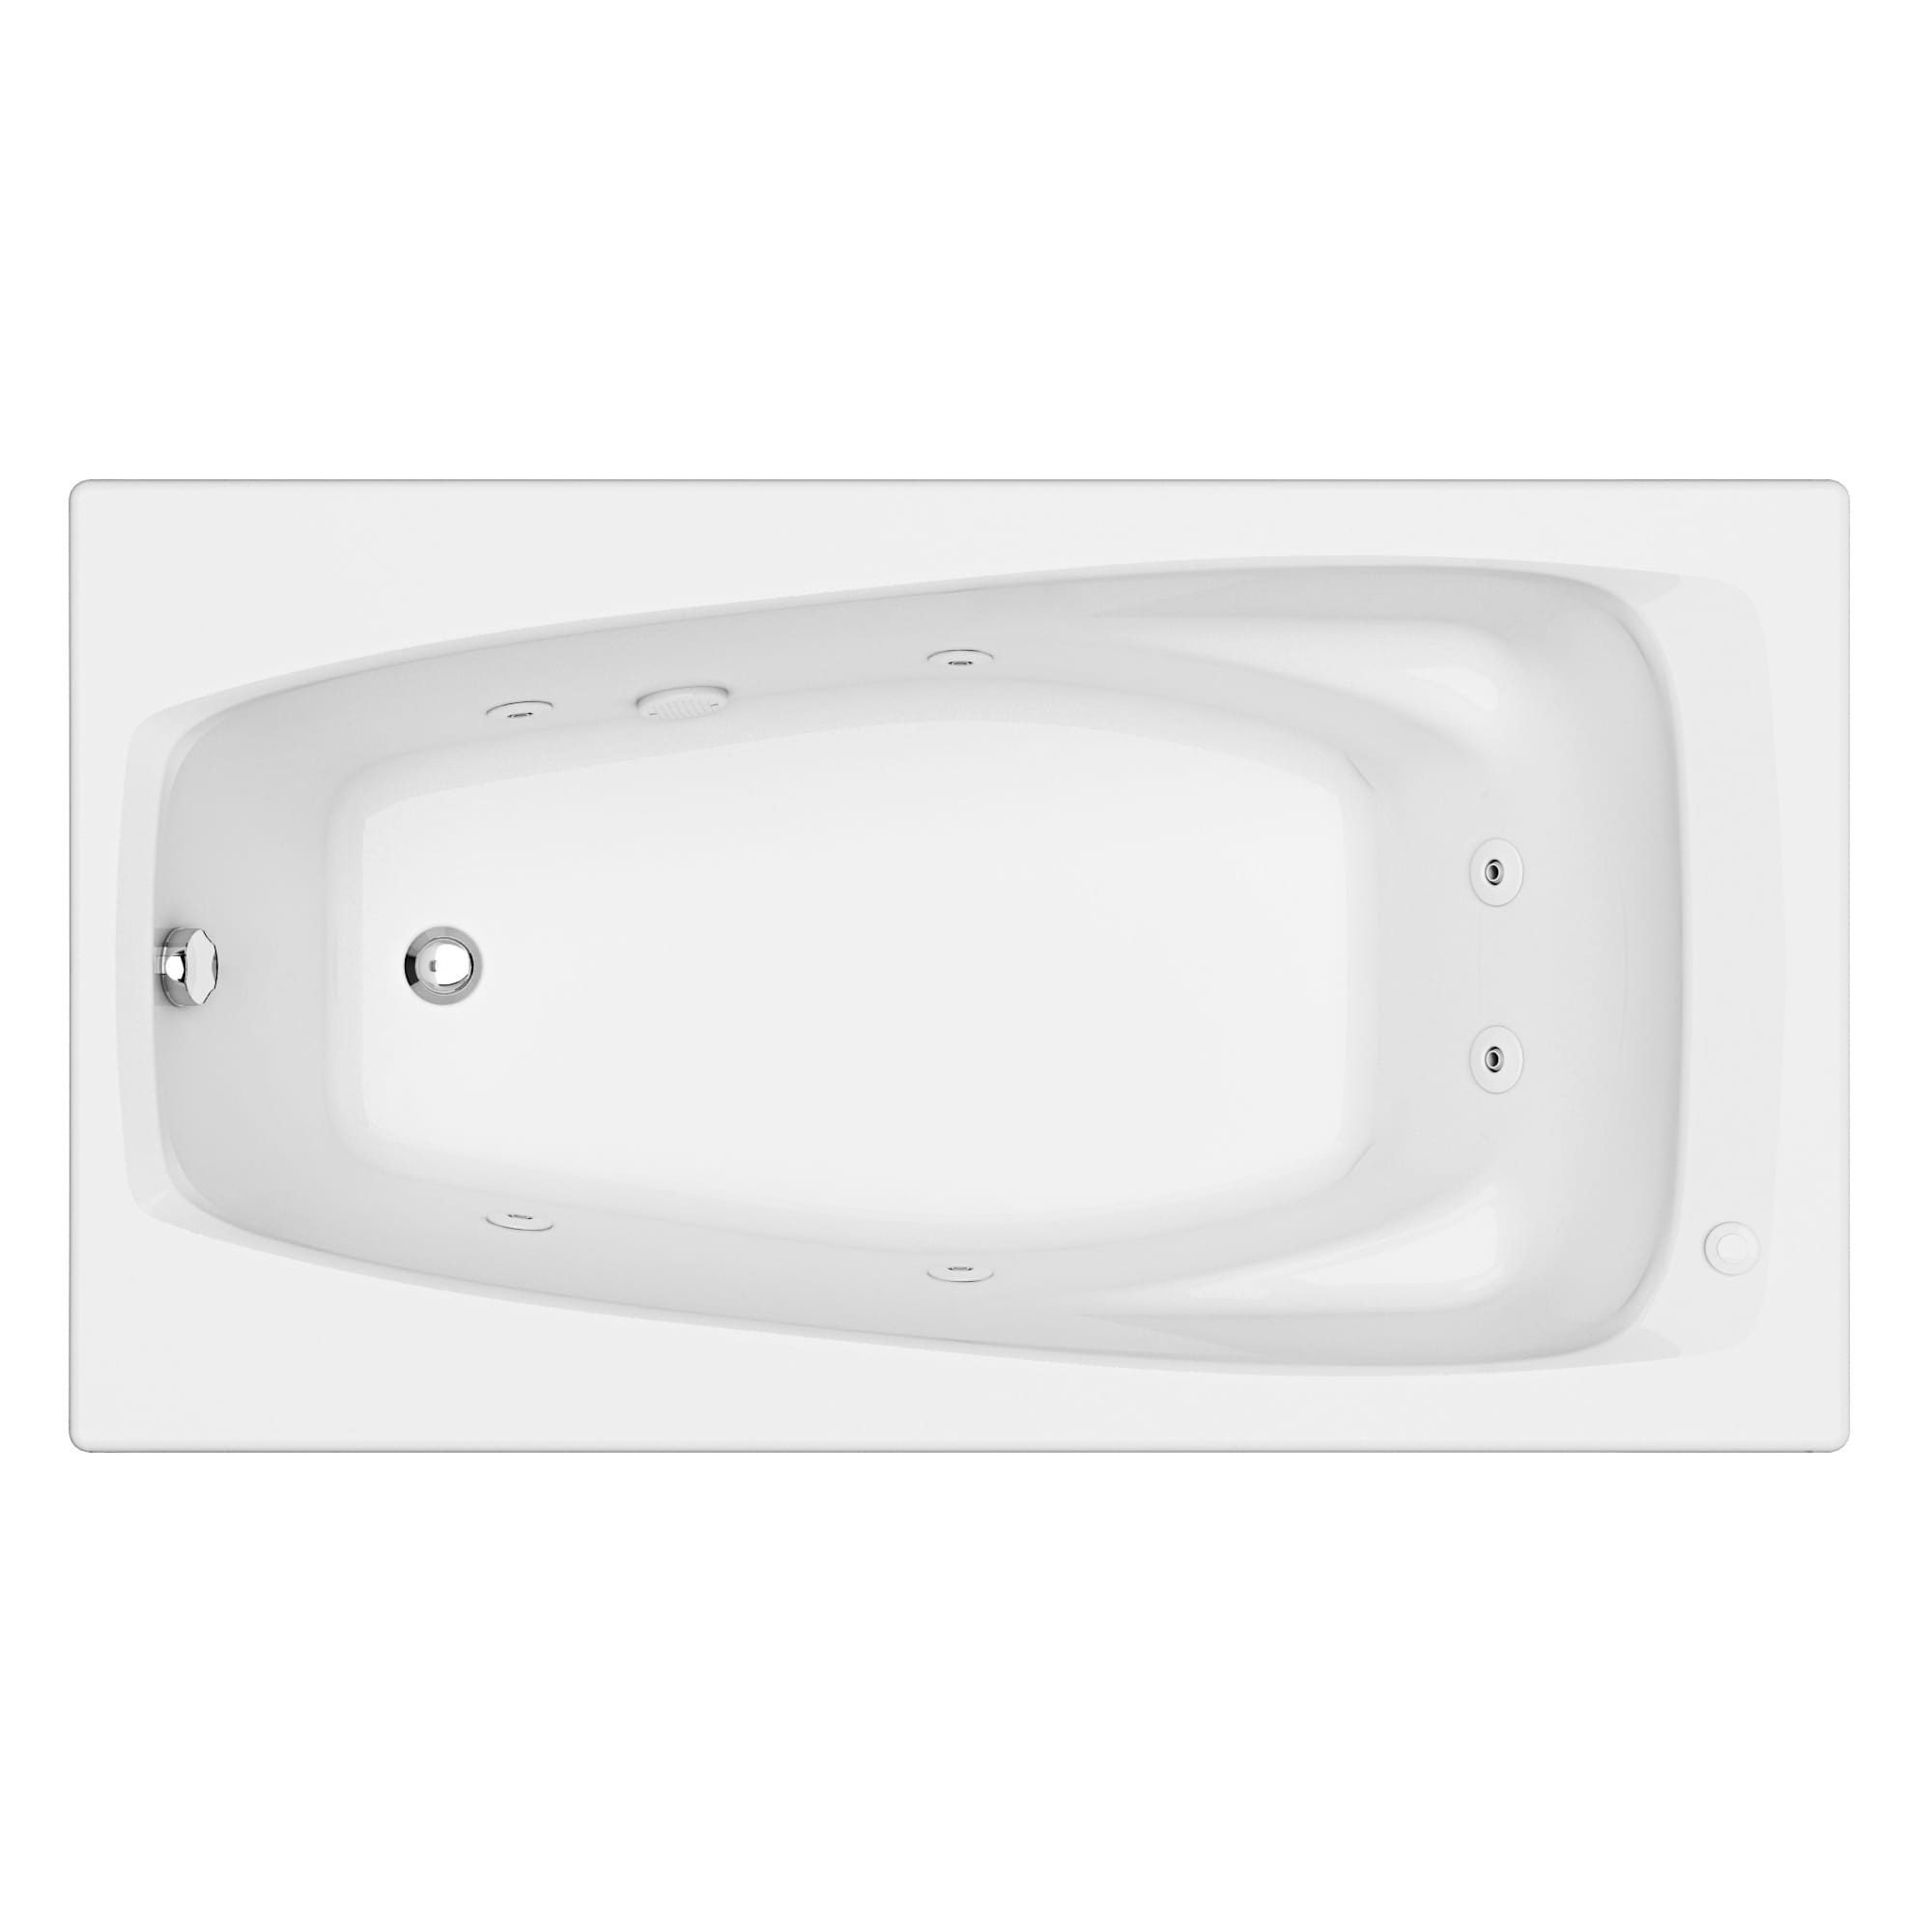 Mainstream 60in x 32in 6 Jet Drop In Whirlpool Tub WHITE